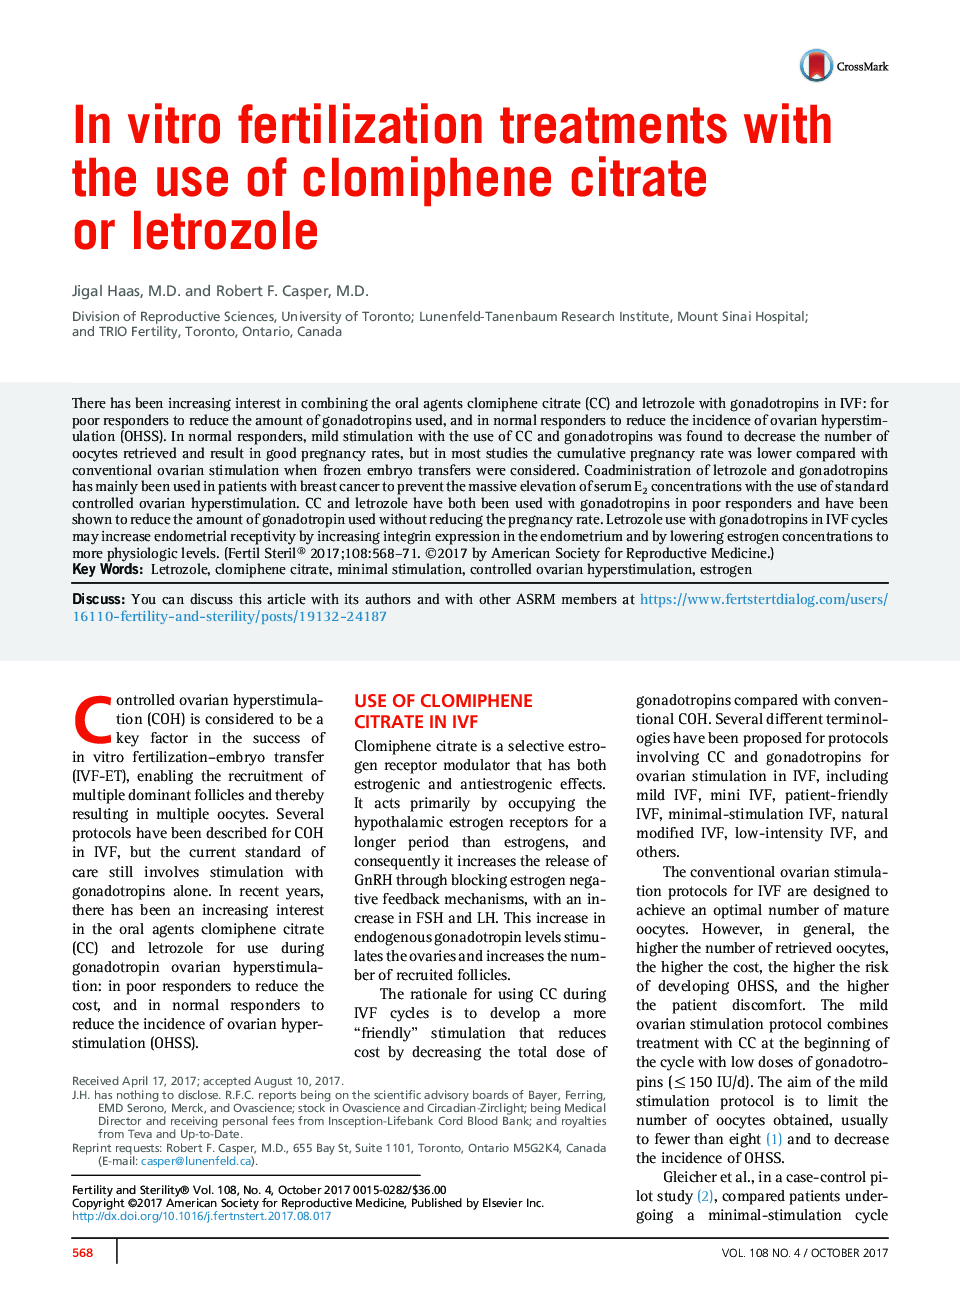 InÂ vitro fertilization treatments with the use of clomiphene citrate or letrozole